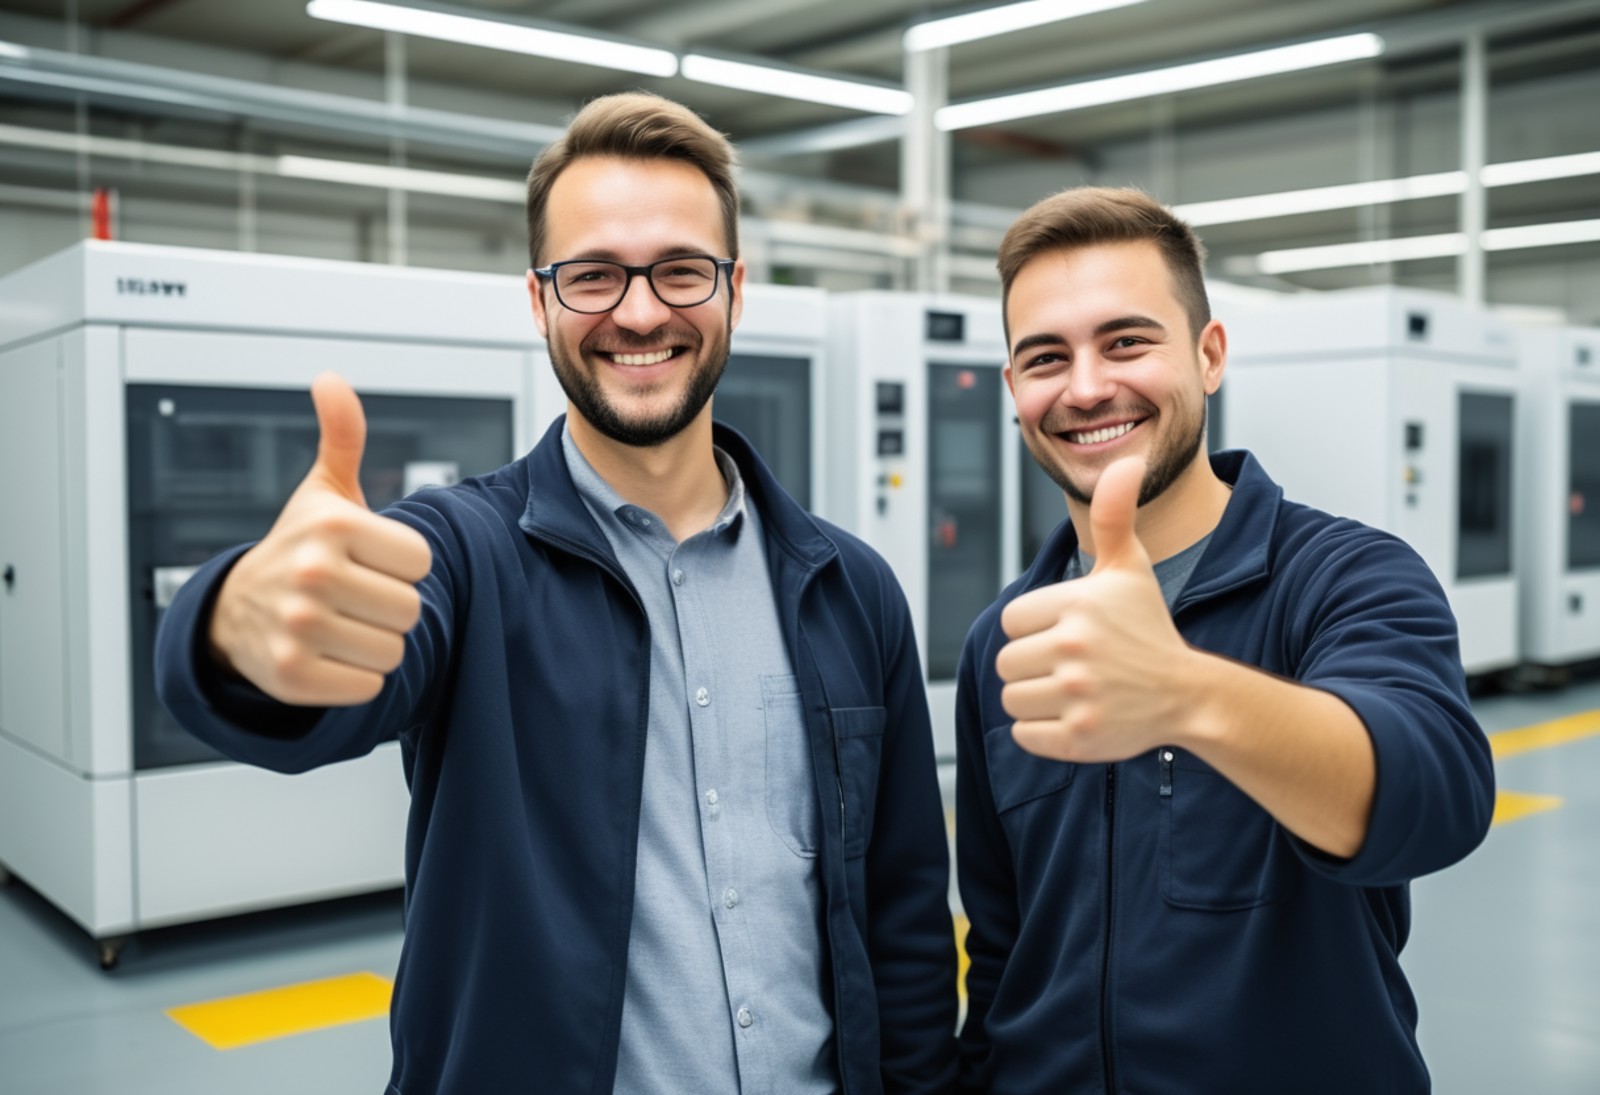 technician with IT worker, happy and smiling, thumbs up gesture against a background of printing machines. Photographic qu...